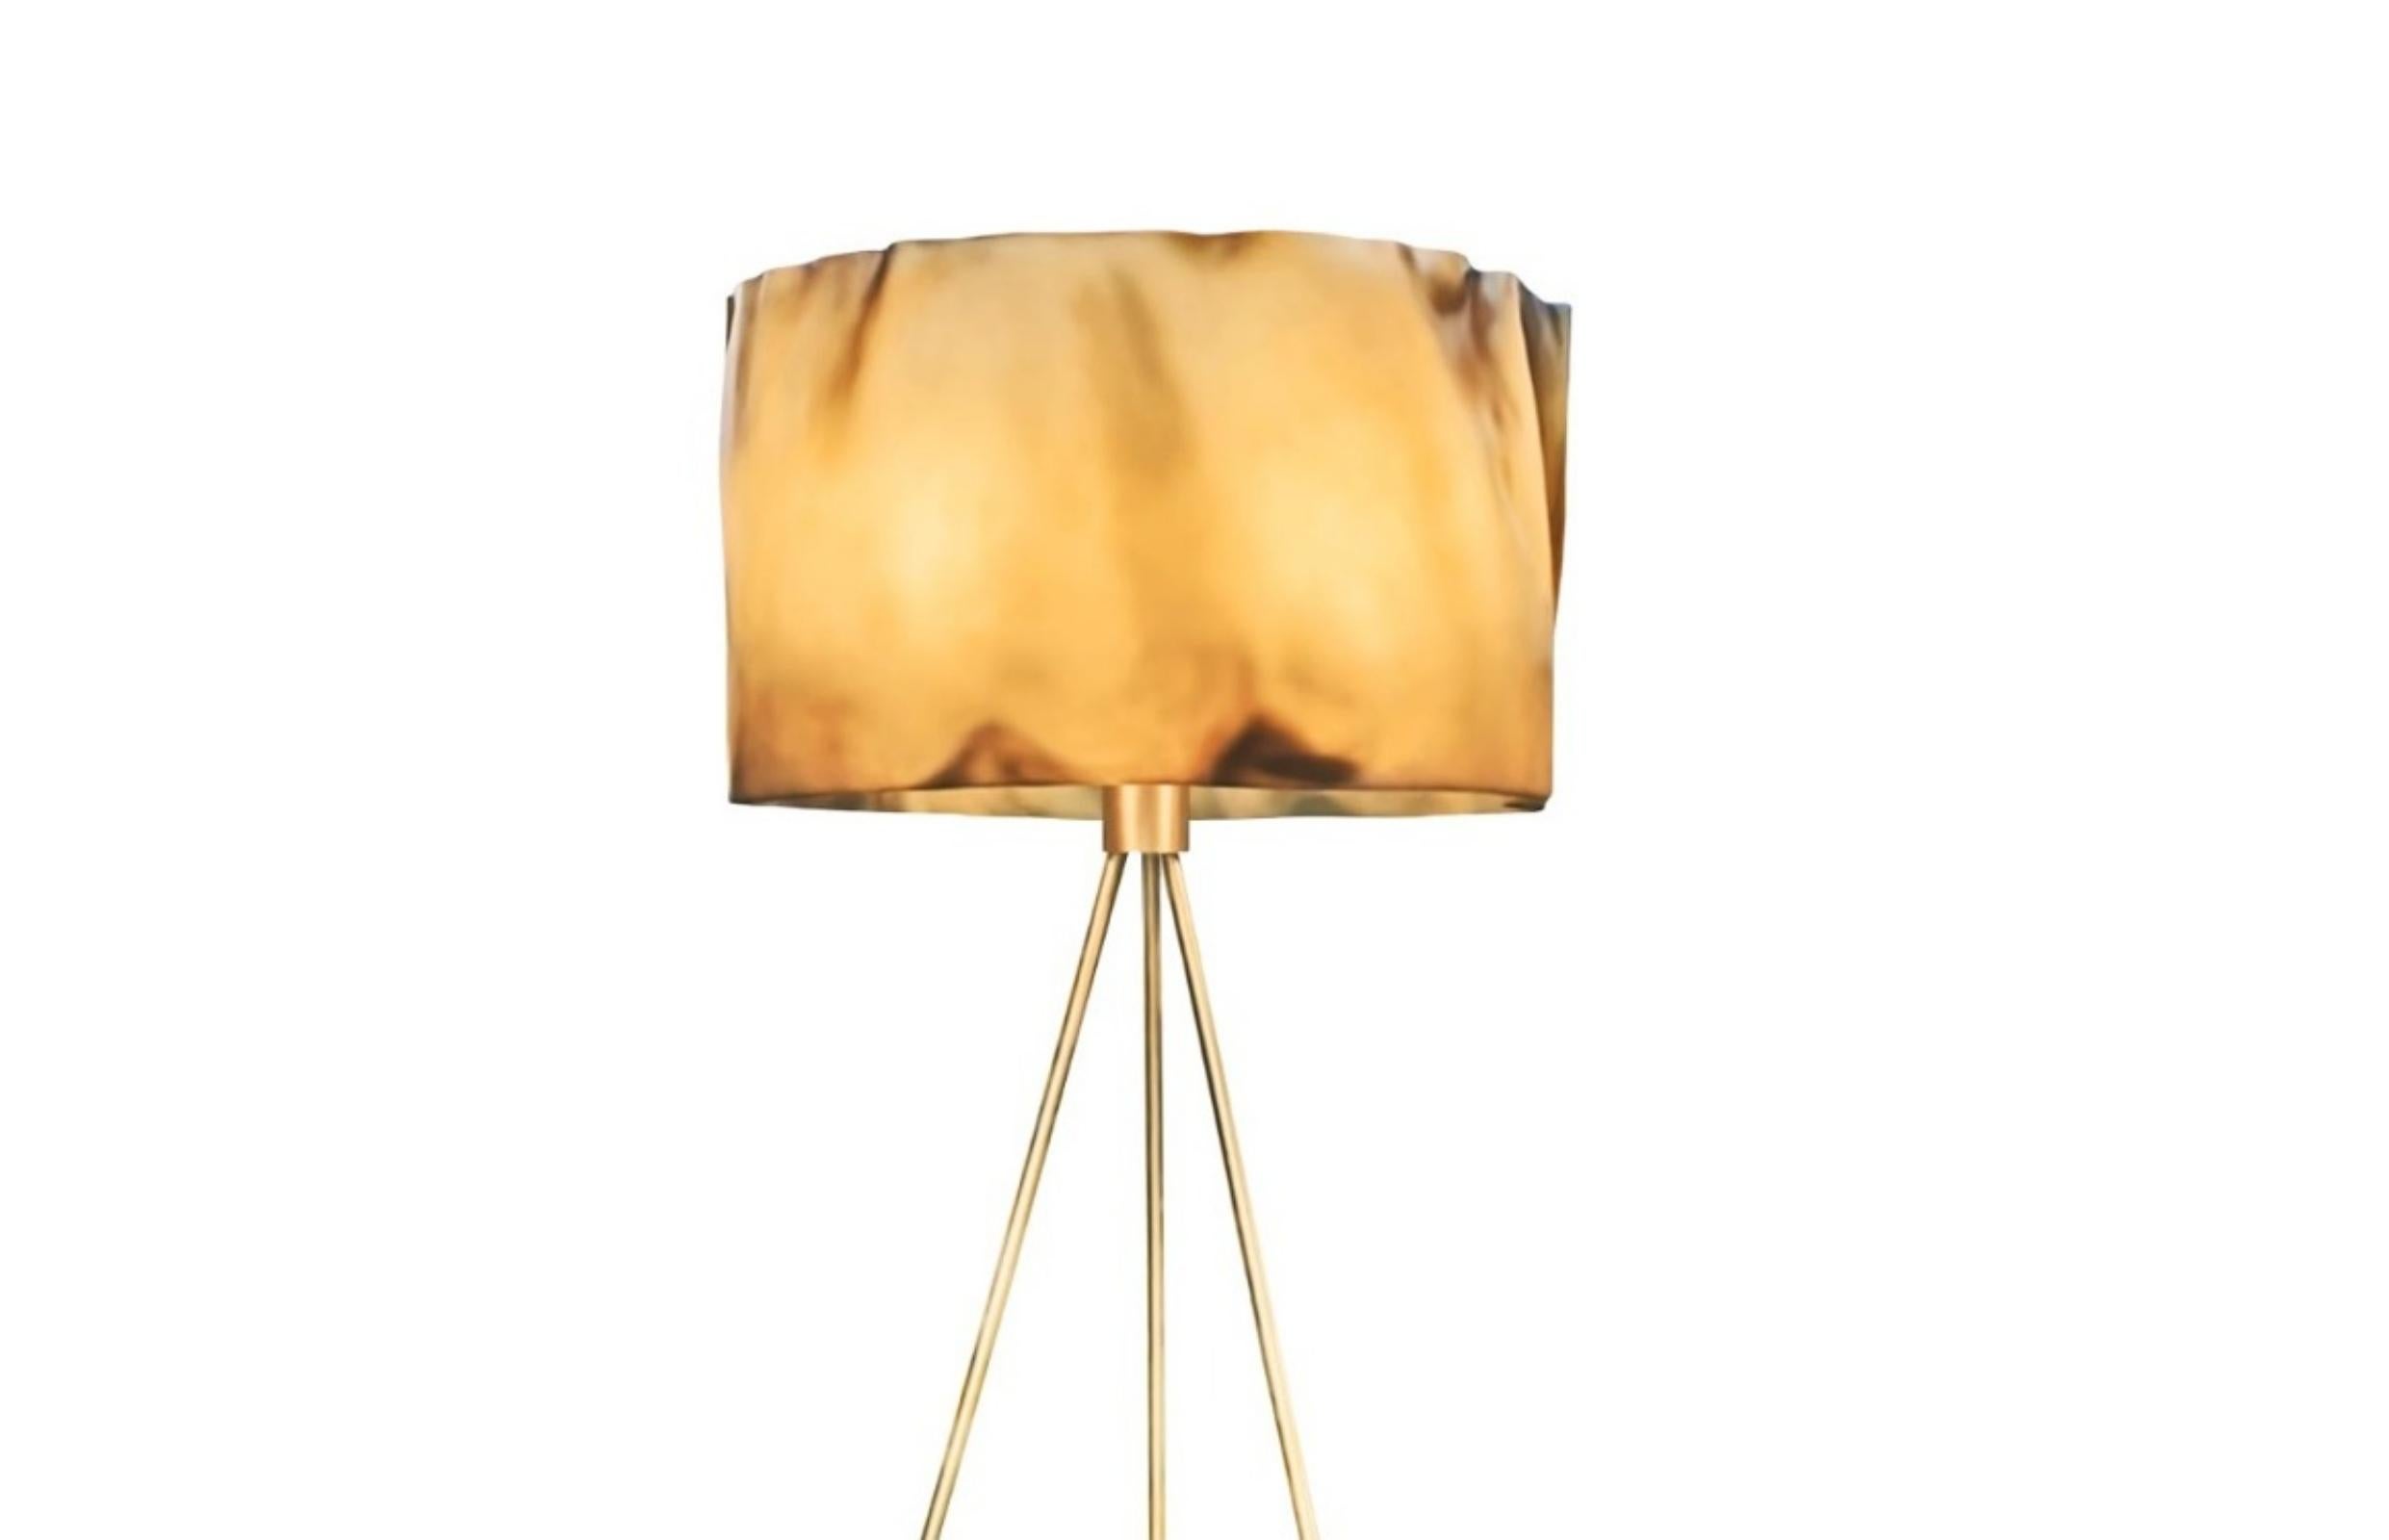 New Pair of Floor Lamp and Suspension Lamp in Resin Finished in Aged Natural For Sale 2